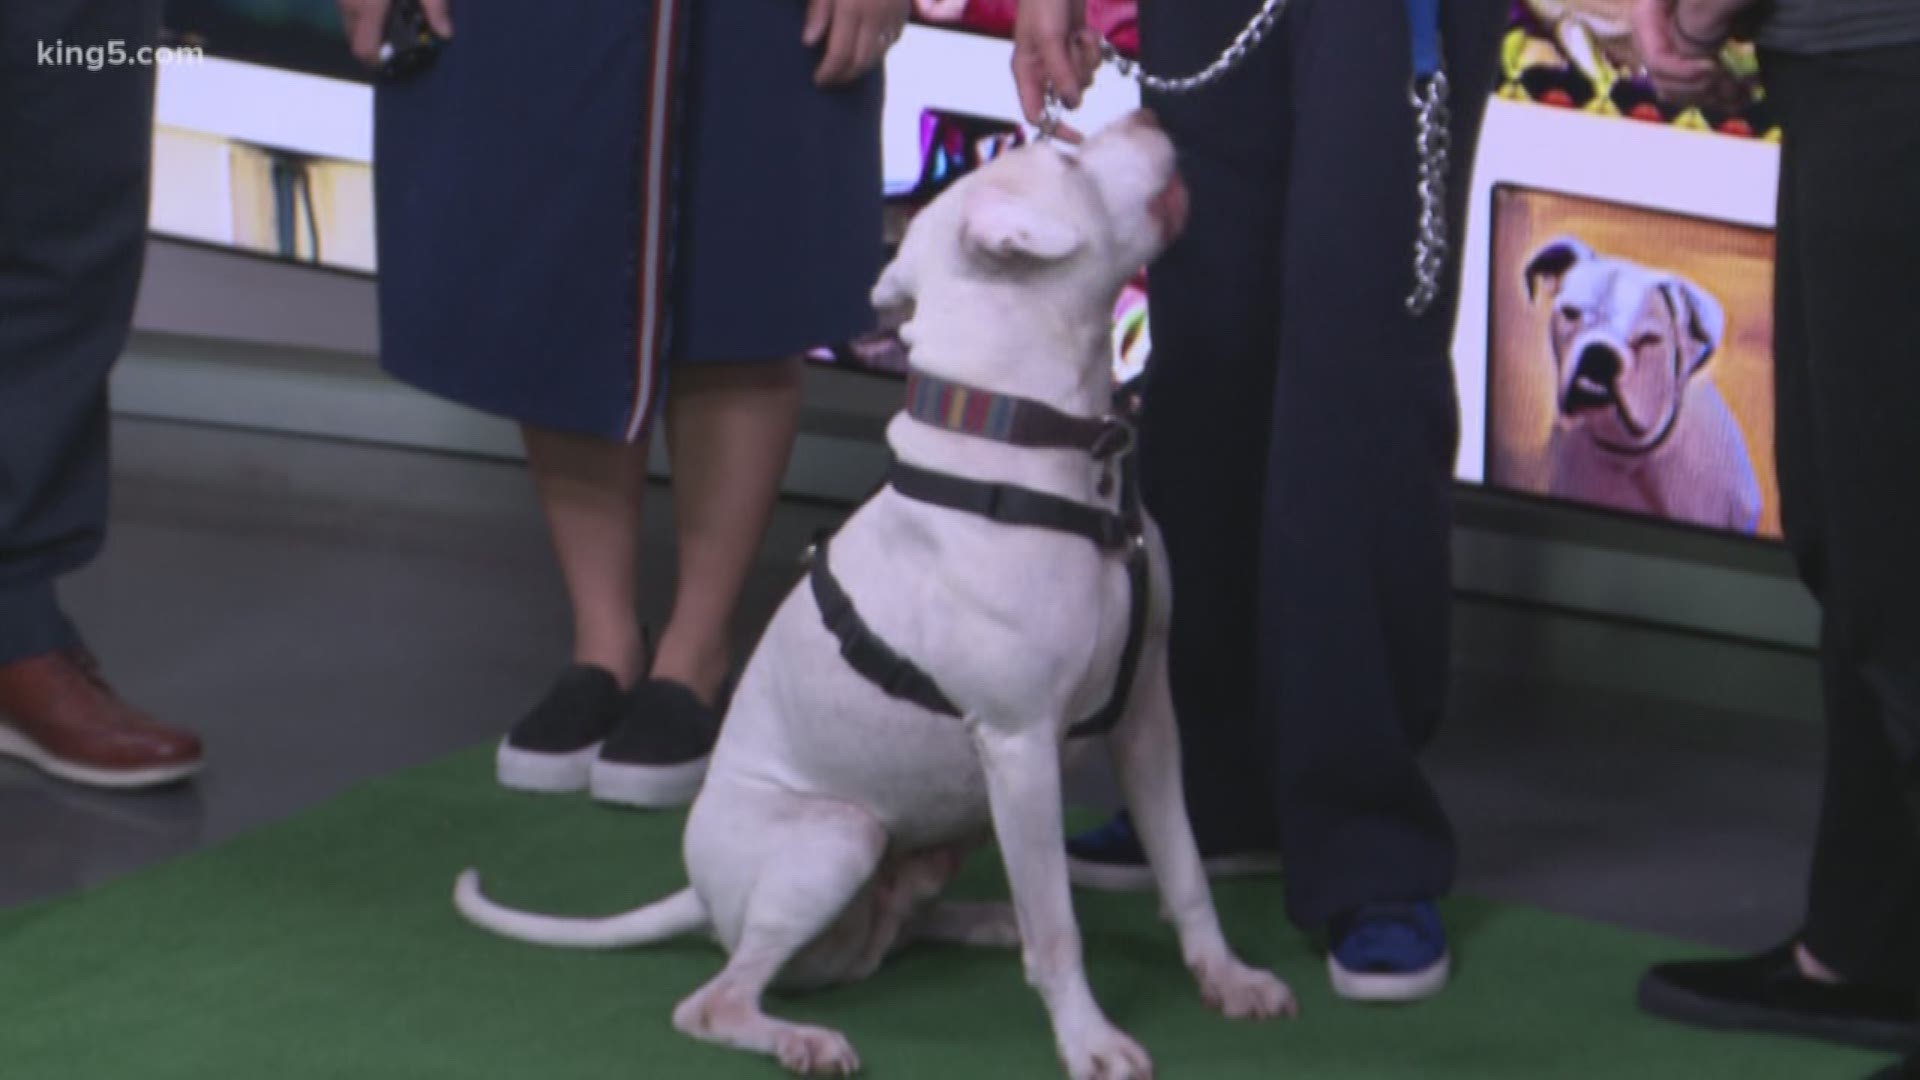 Iggy is deaf and in need of adoption.  But he and other dogs like him can learn to respond to other cues with the right training.